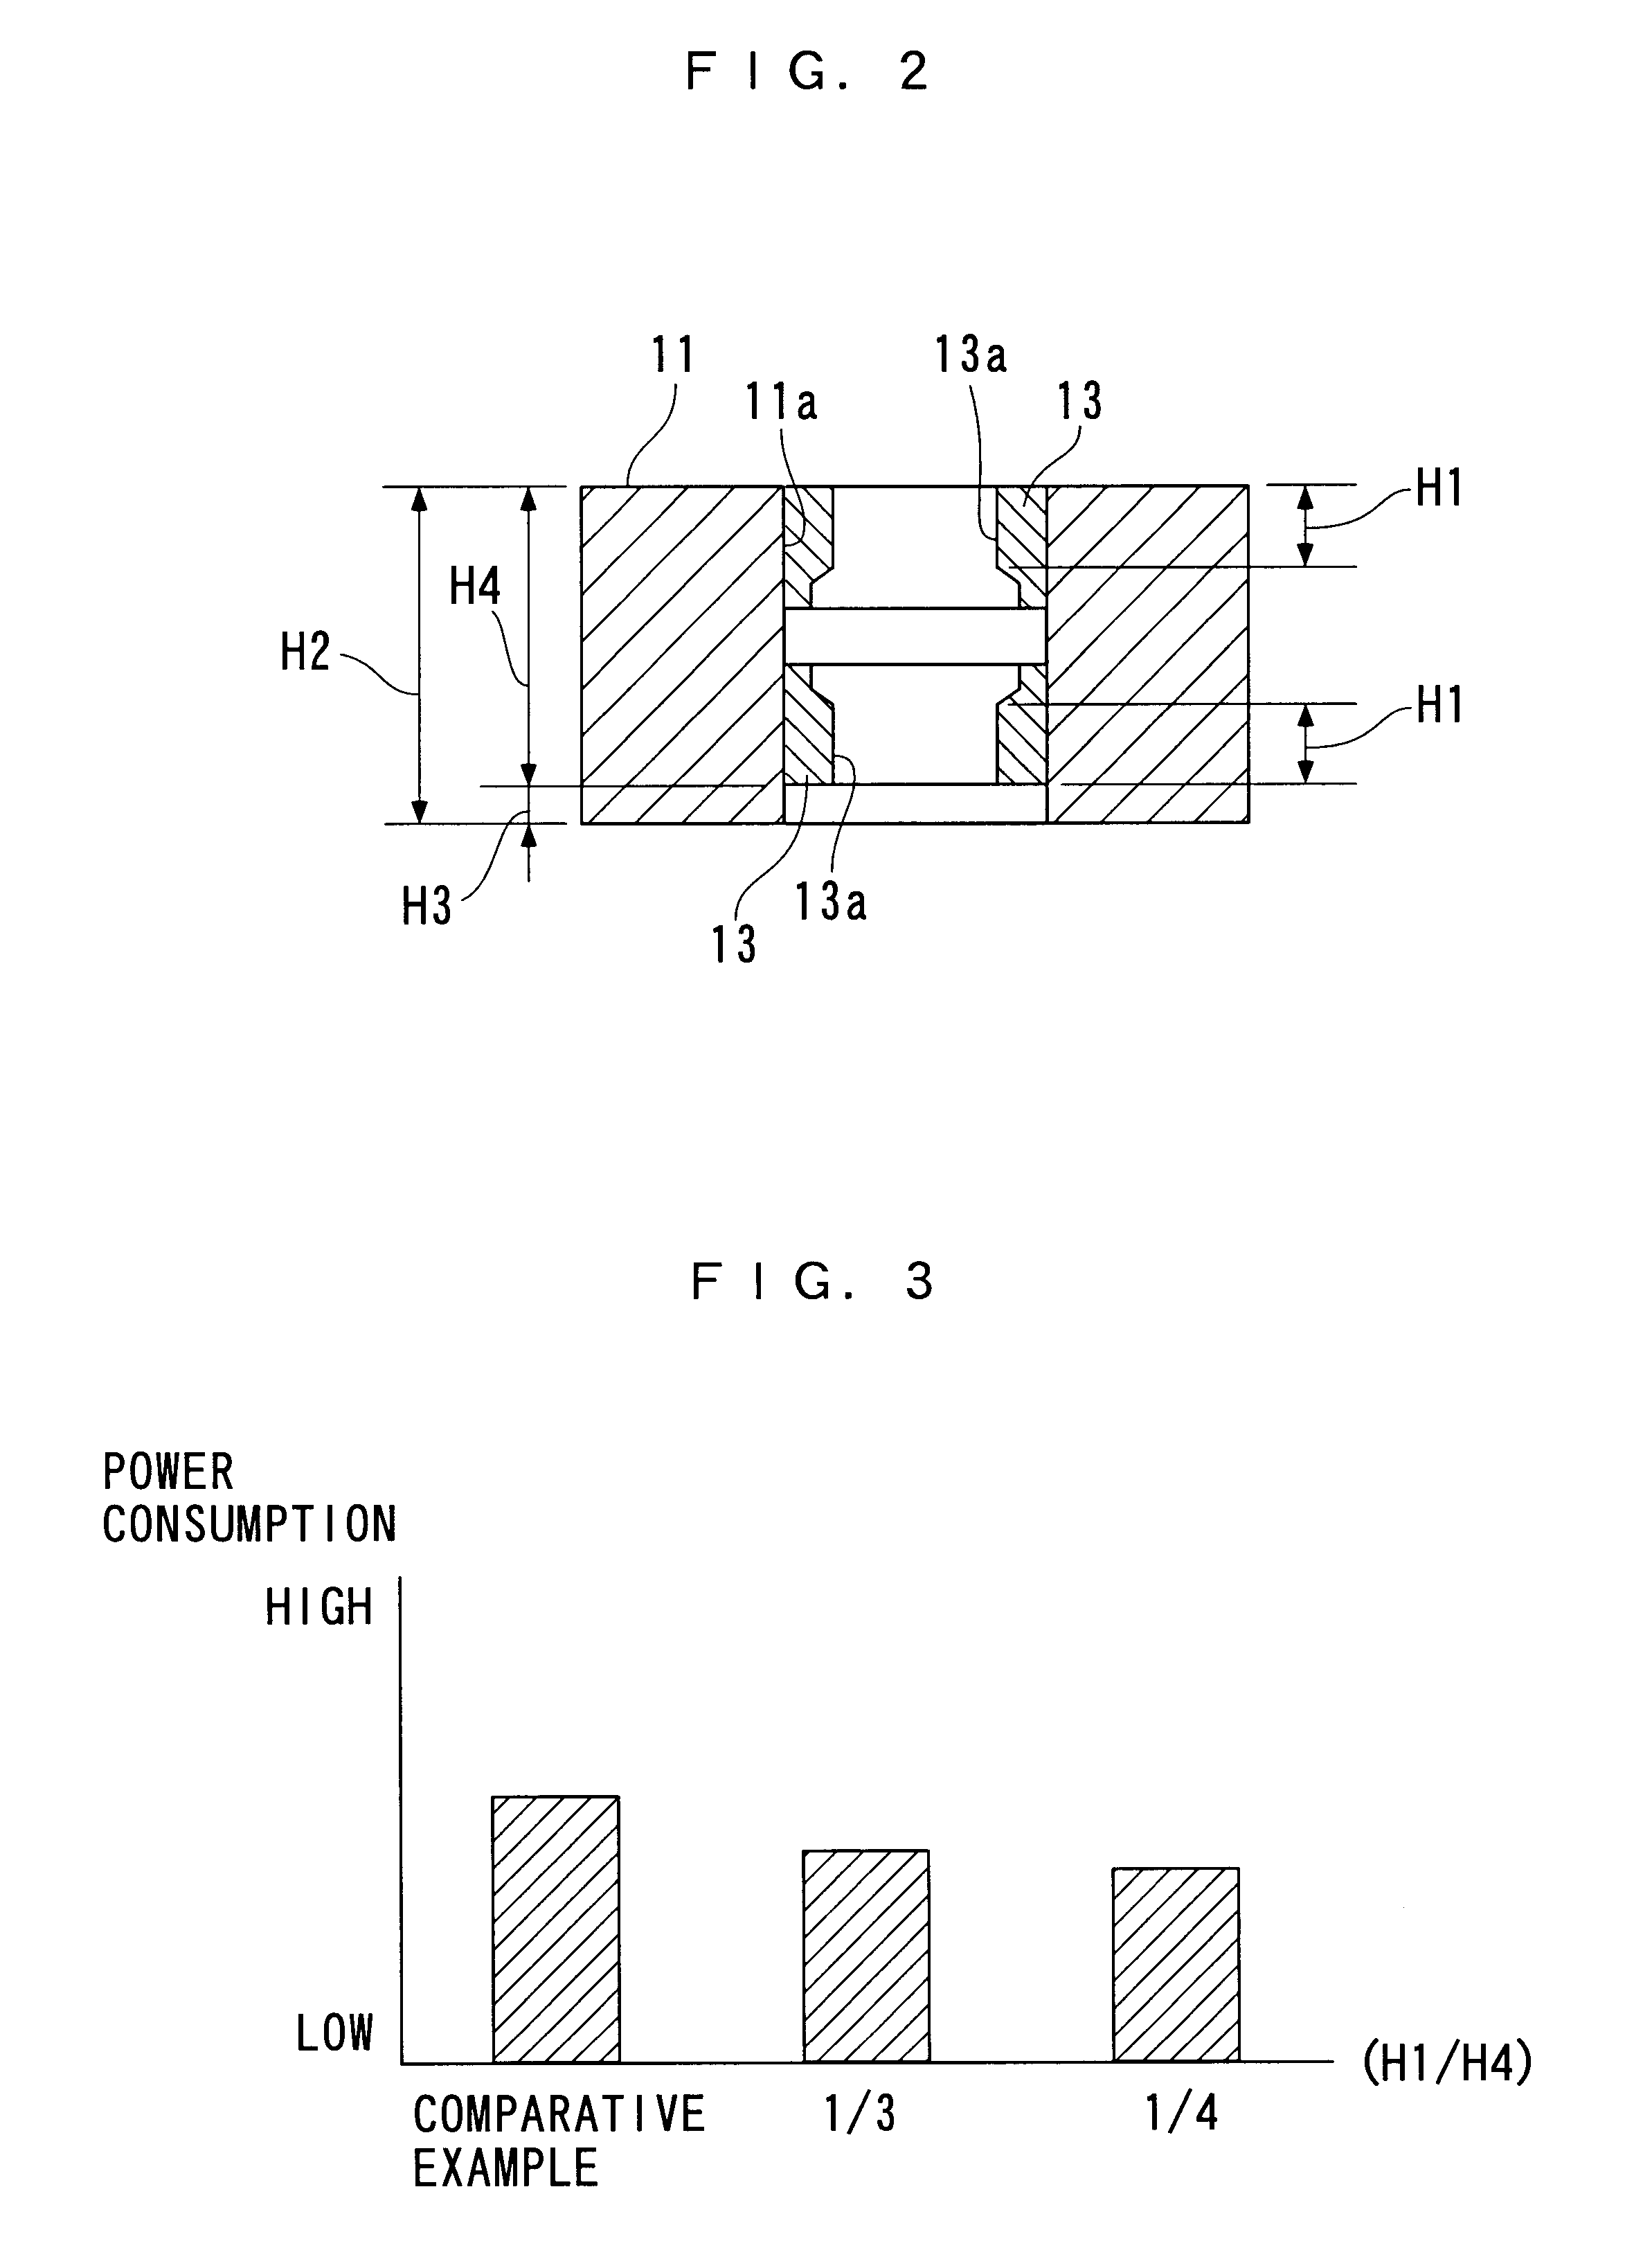 Solenoid-type valve actuator for internal combustion engine